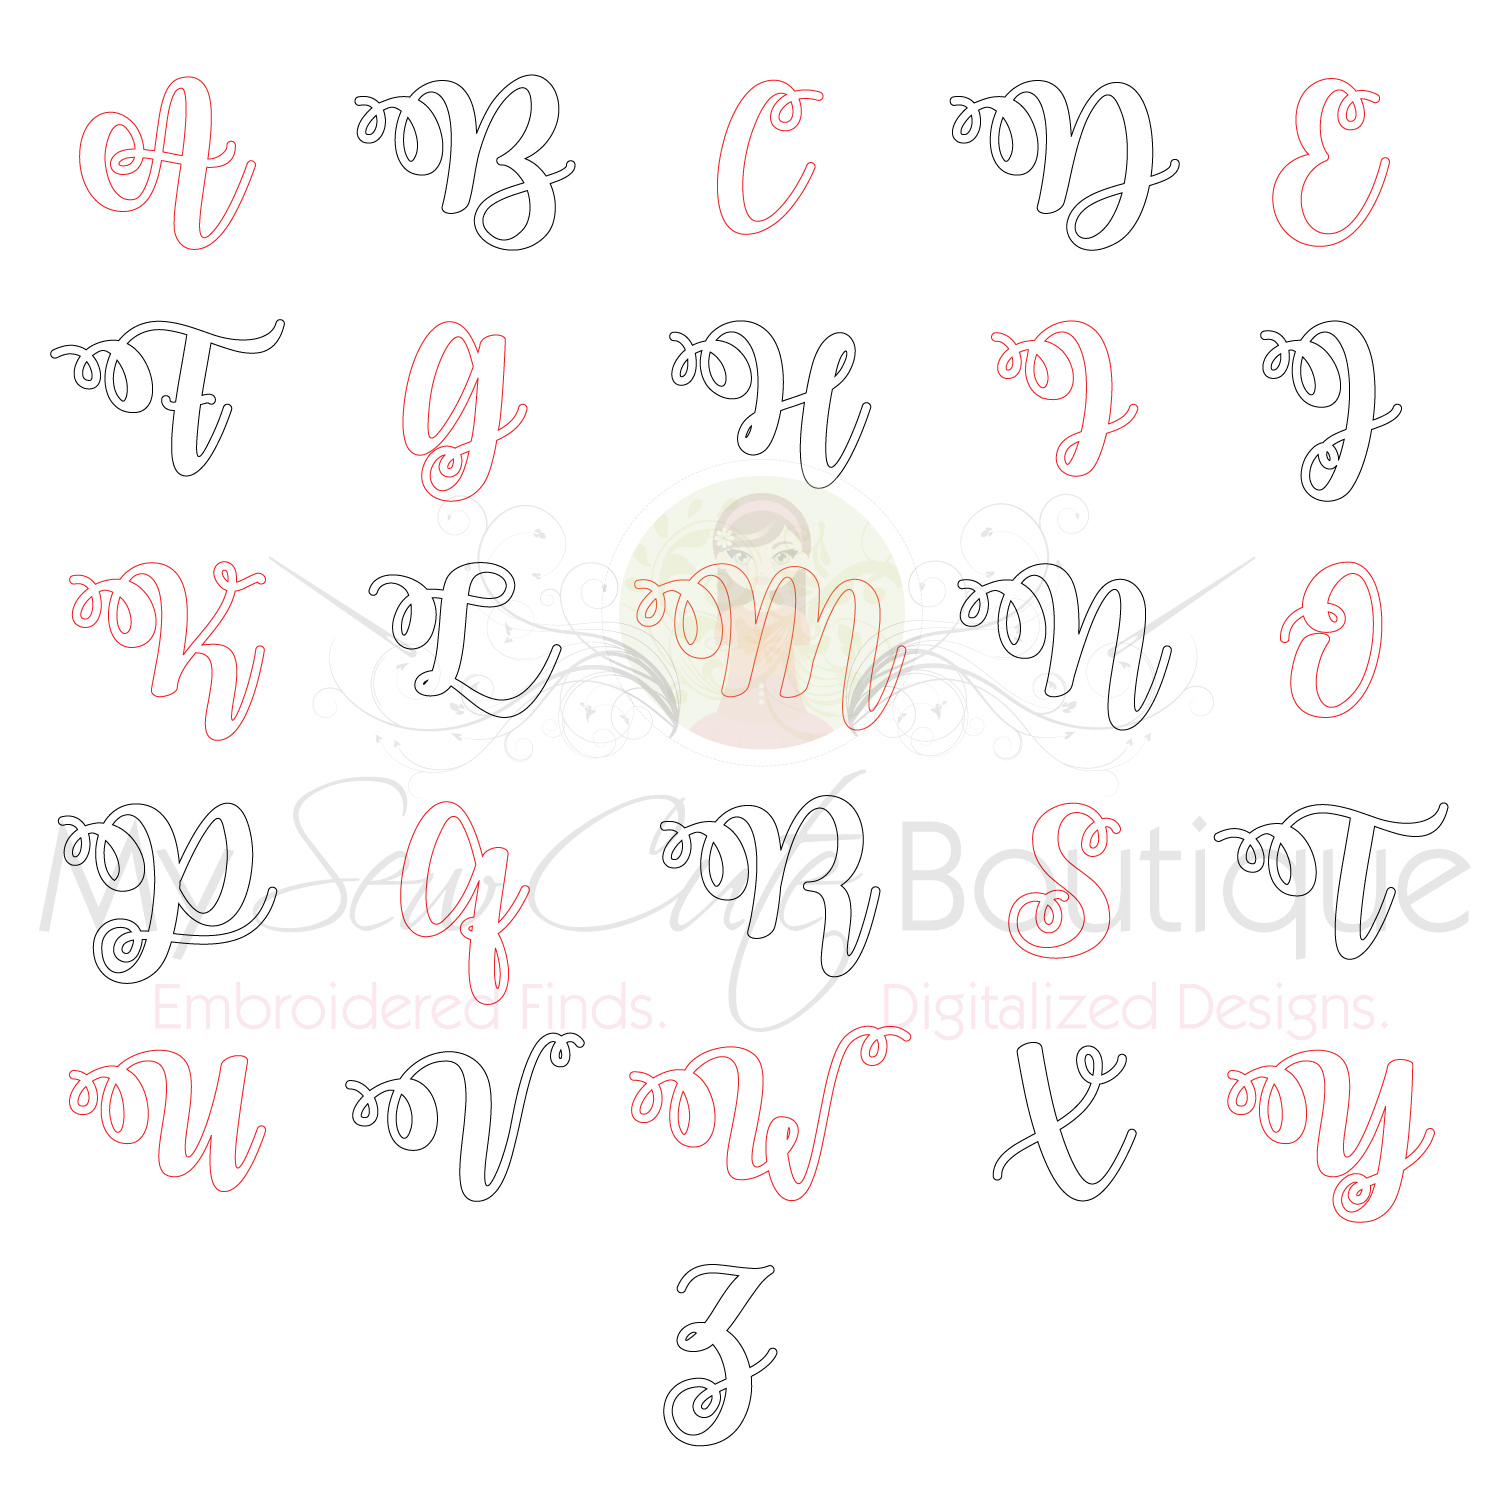 Monogram Patterns For Embroidery Raggy Applique Fonts Embroidery Monogram Letters Designs Raggy Embroidery Font 4 Sizes Instant Download